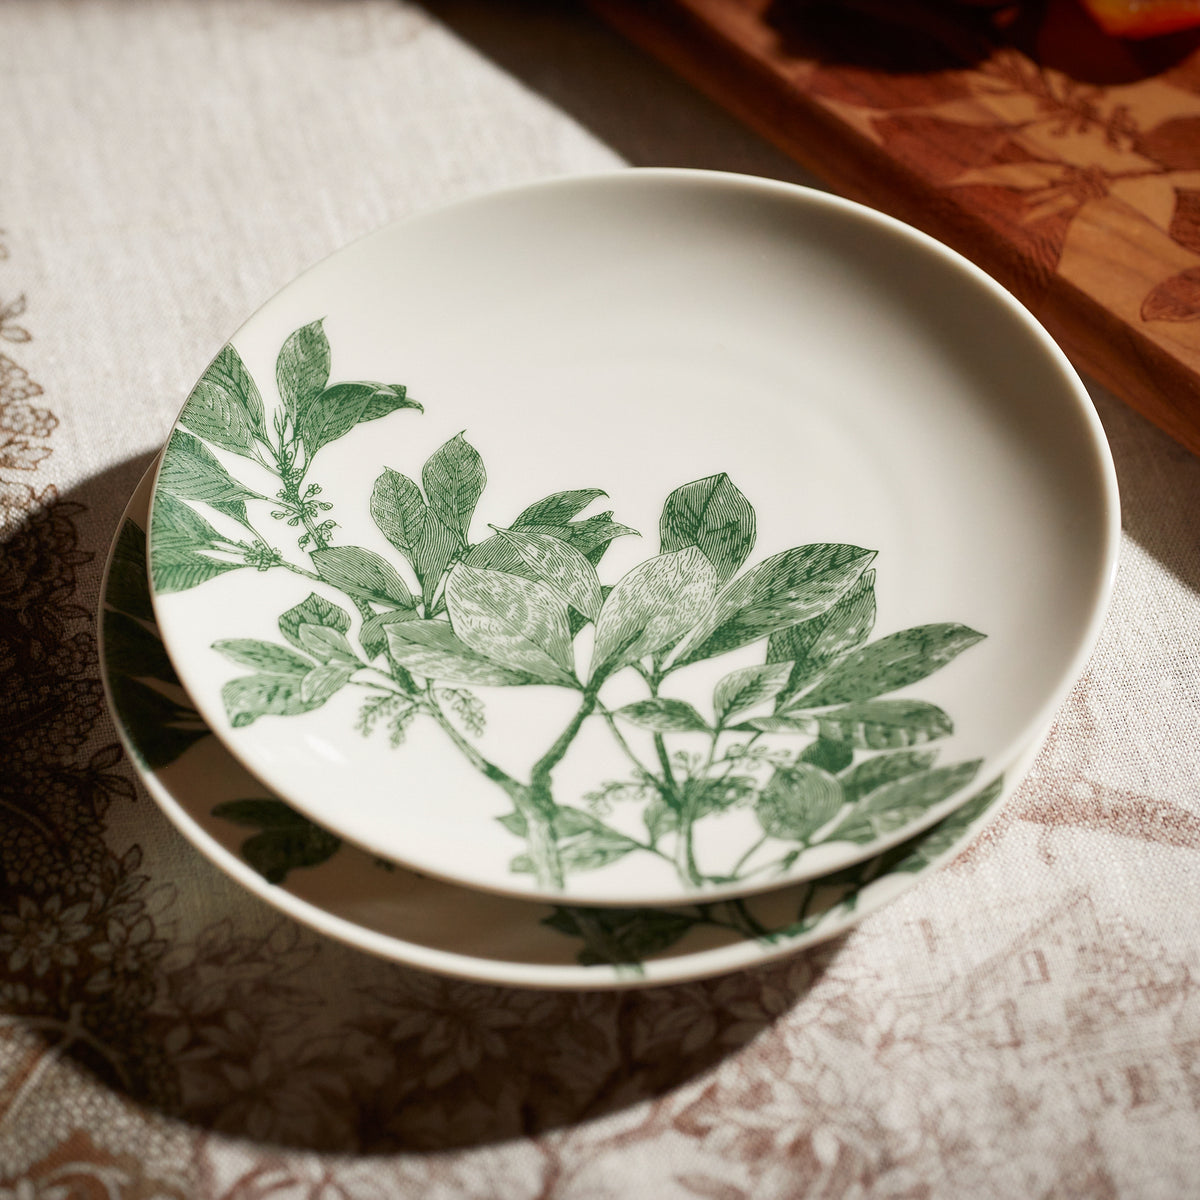 A white ceramic plate with green leaf designs, part of a botanical dinnerware collection, sits on a patterned tablecloth, partially overlapping another plate beneath it. This elegant Arbor Green Small Plate by Caskata is also conveniently dishwasher safe.